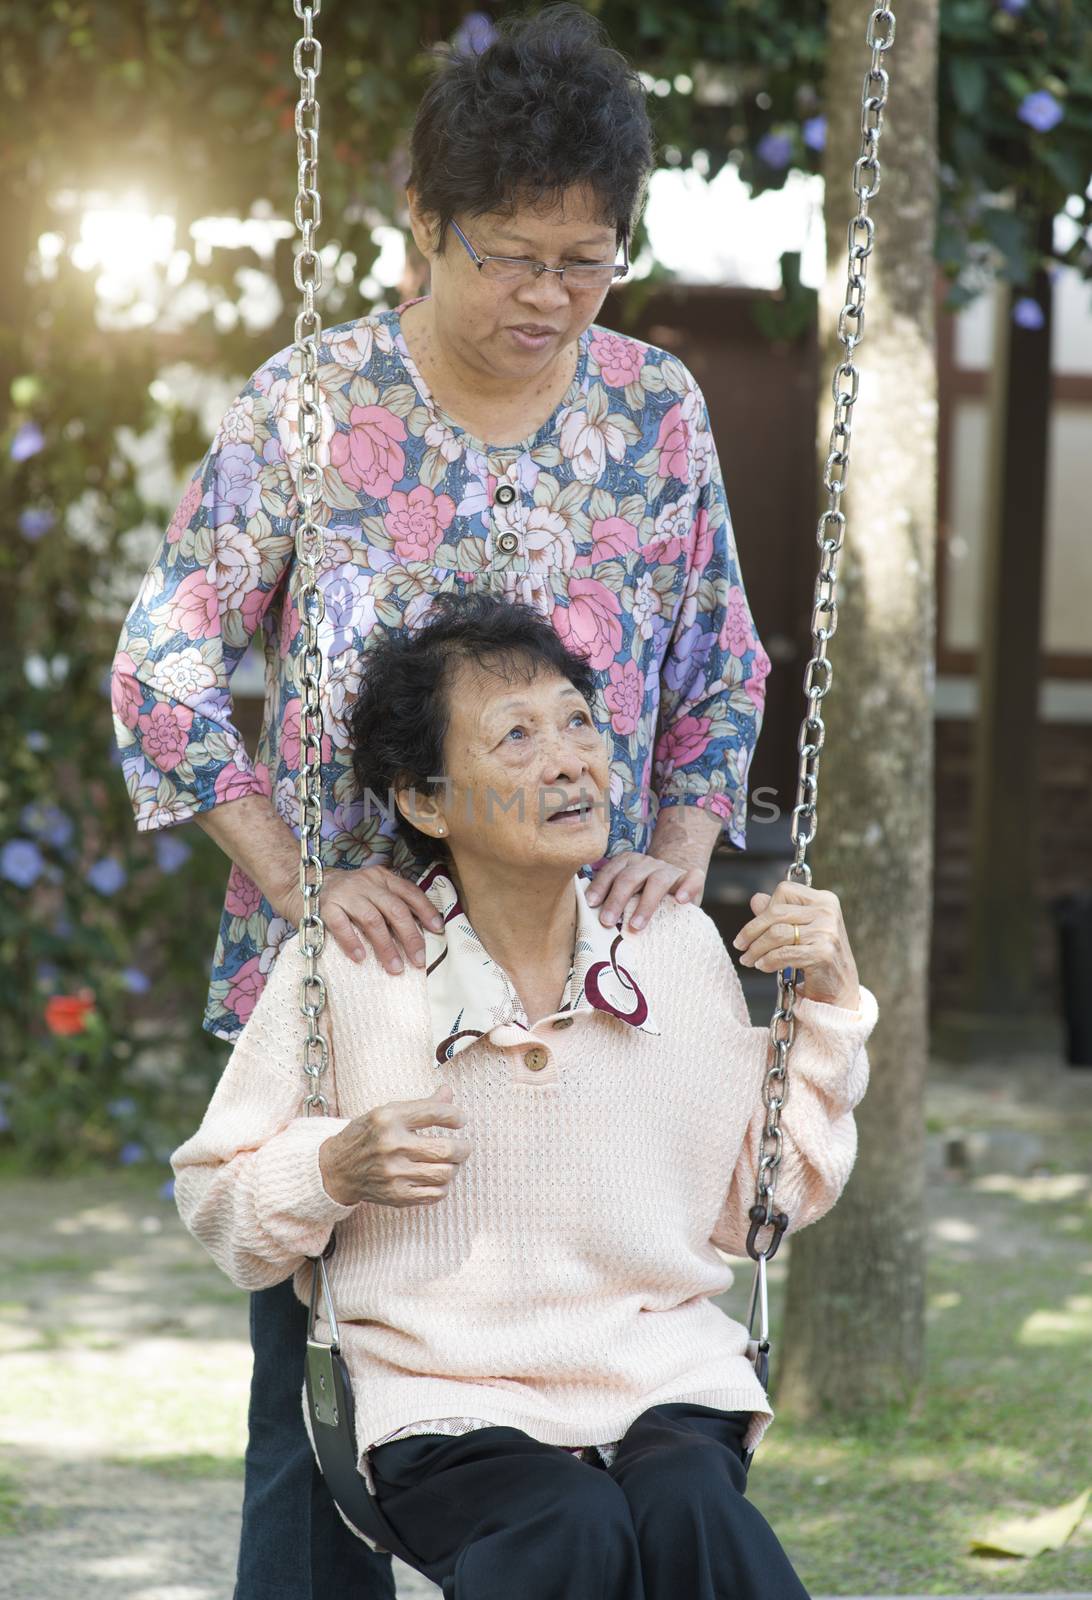 Asian elderly women playing swing at outdoor playground by szefei